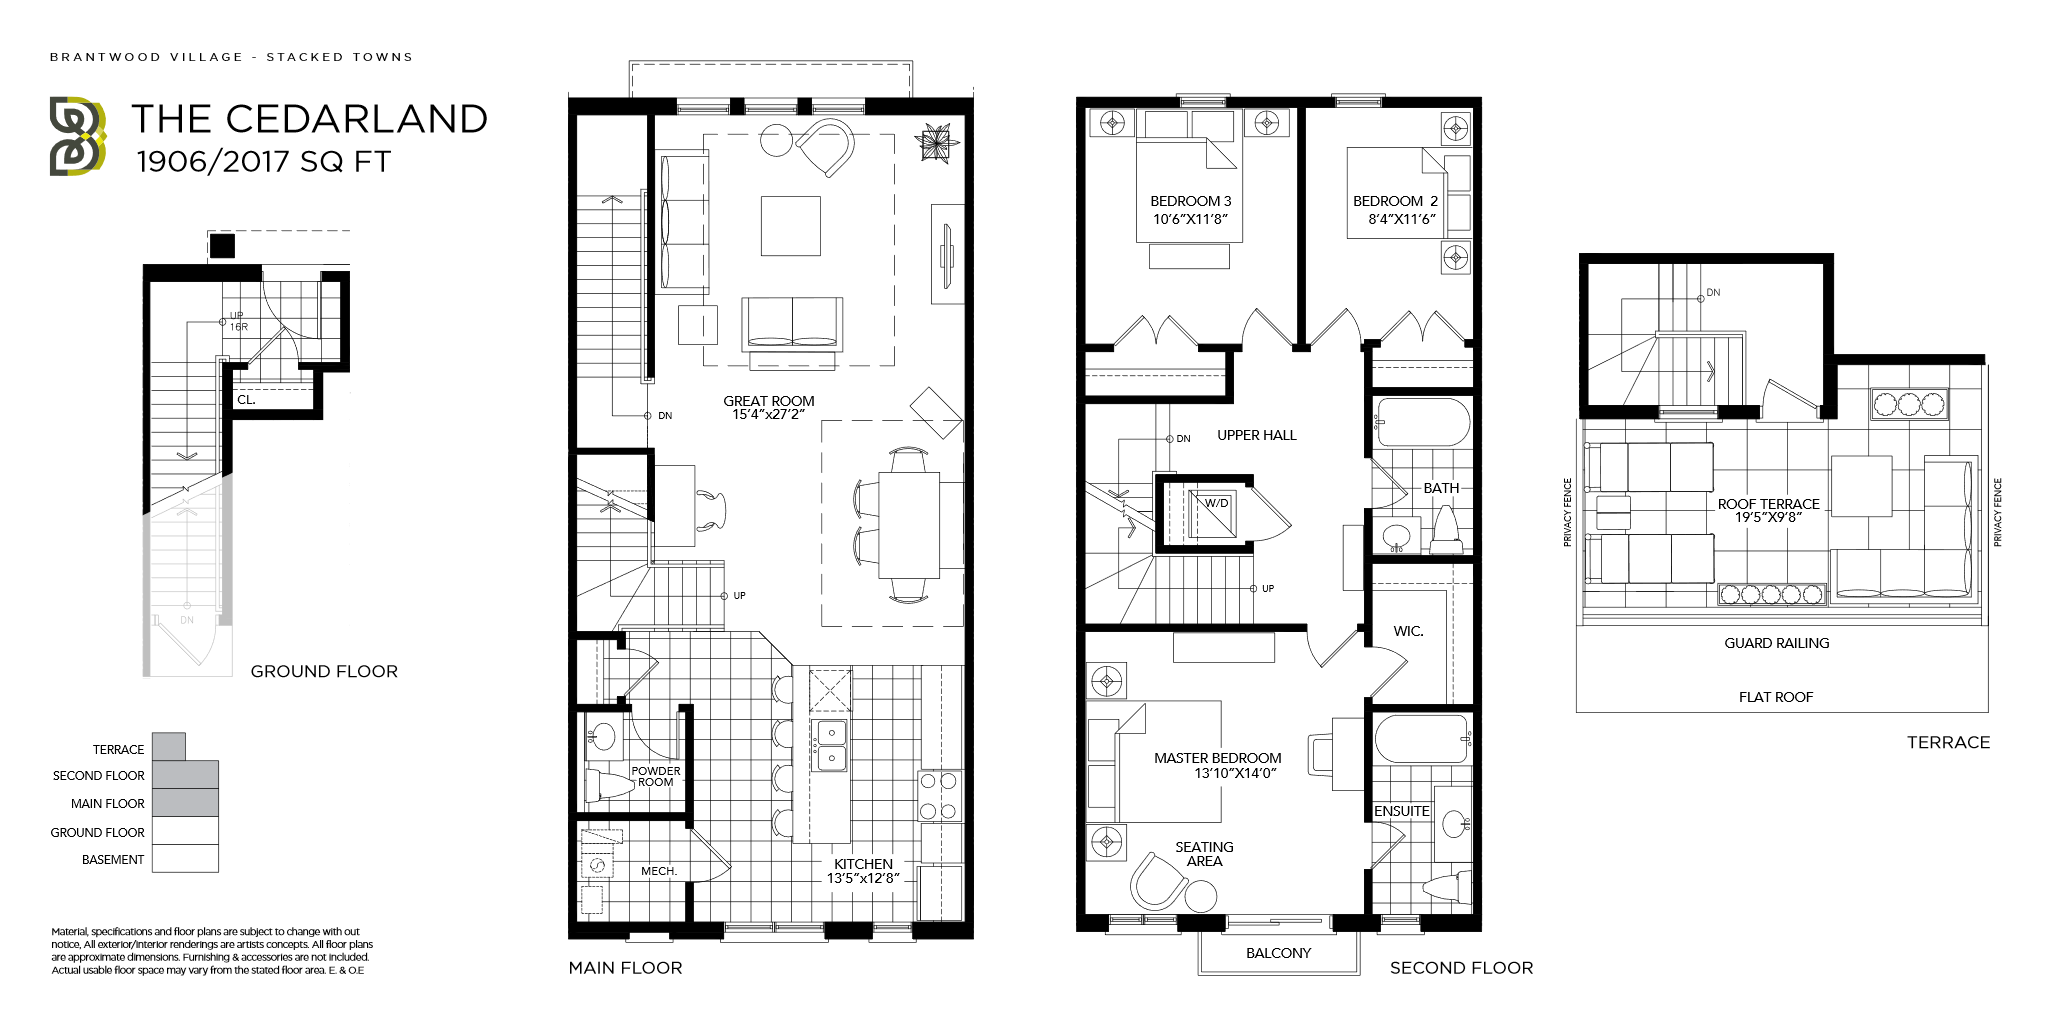 Cedarland Floor Plan of Brantwood Village Towns with undefined beds